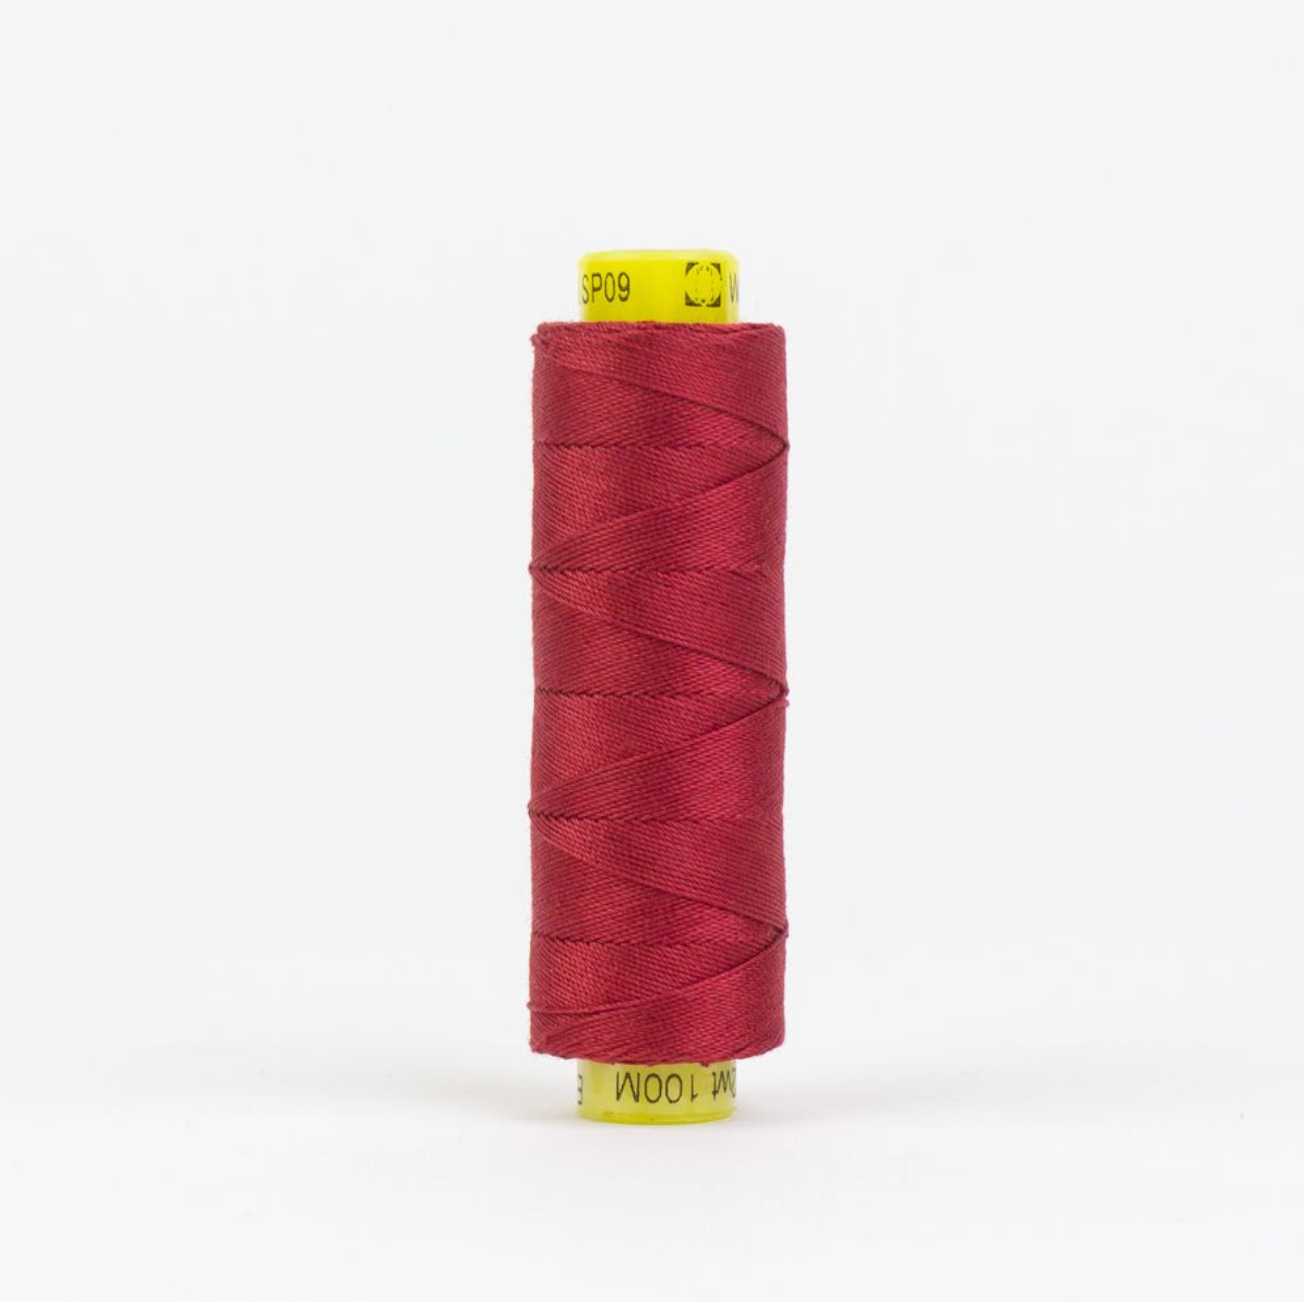 Spagetti 12wt Egyptian Cotton Thread - 109yd Spool - Deep Rich Tomato Red SP-09